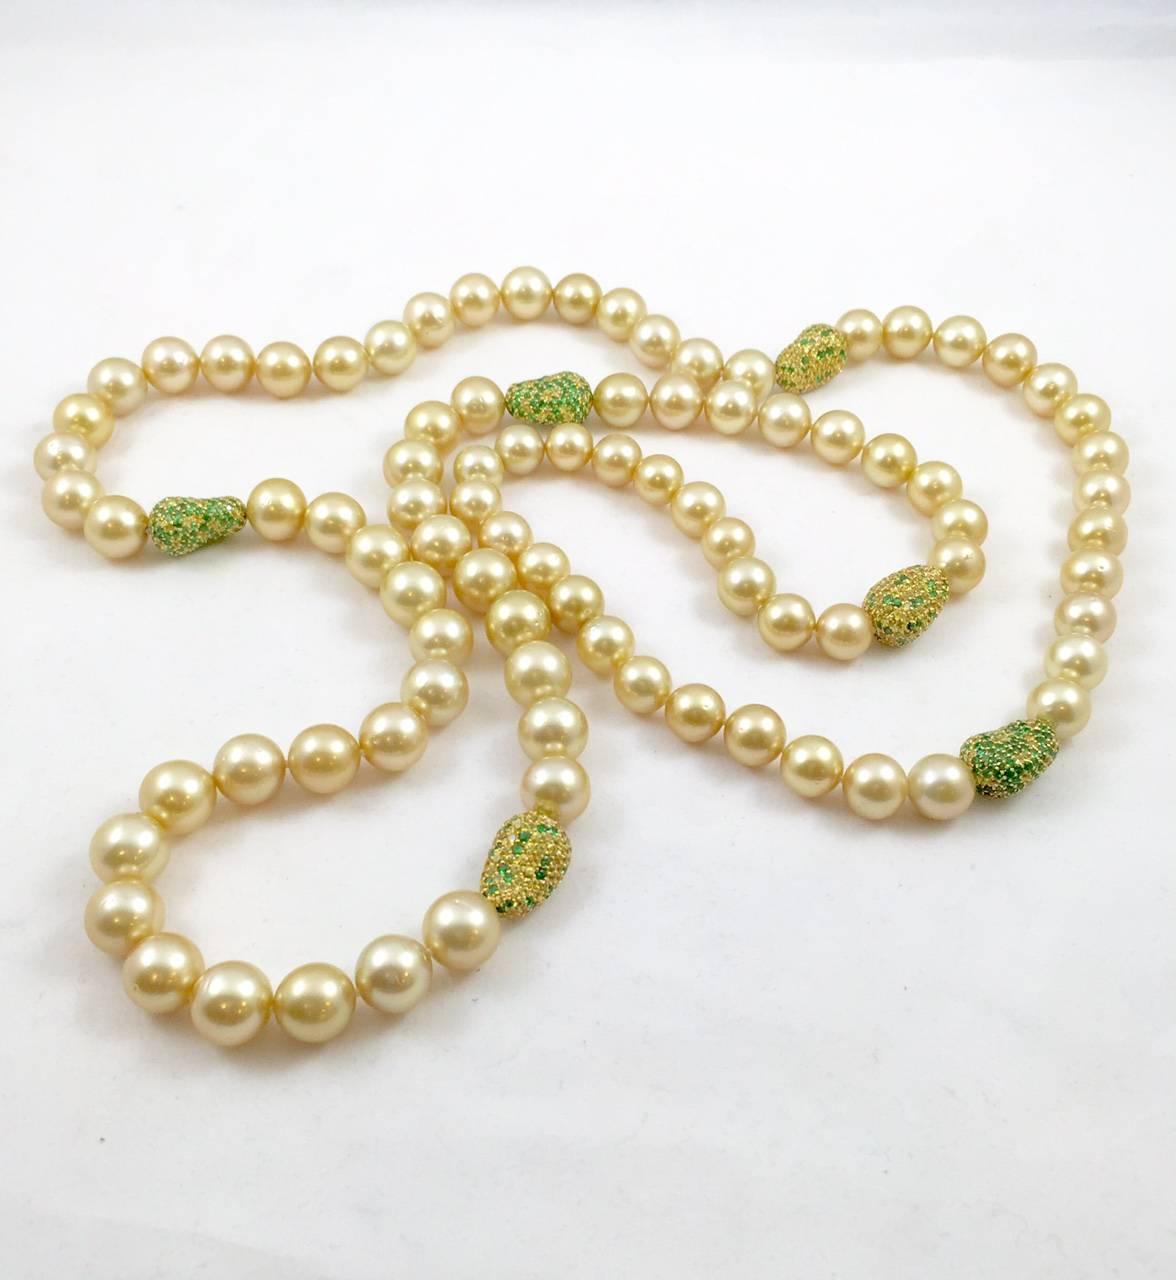 An important and most impressive addition to any fine jewelry collection.  Forty-two inches of magnificence!  Beautifully matched 9.5-10mm Golden South Sea Pearls are accentuated by six 18K yellow gold stations embellished with yellow sapphires and